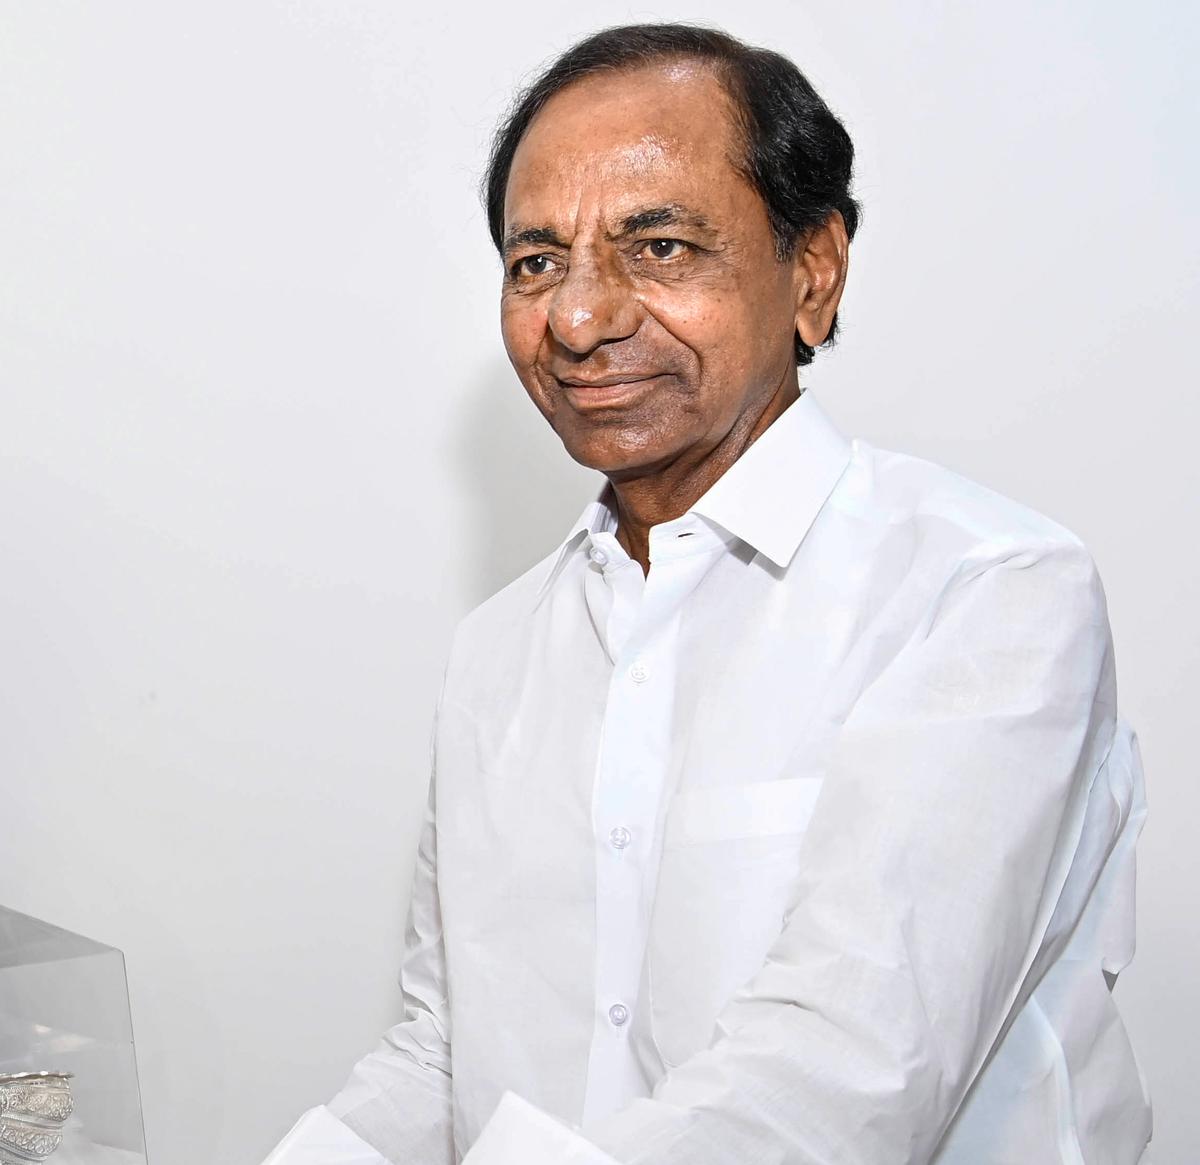 Telangana CM to begin India tour with Chandigarh as the first stop